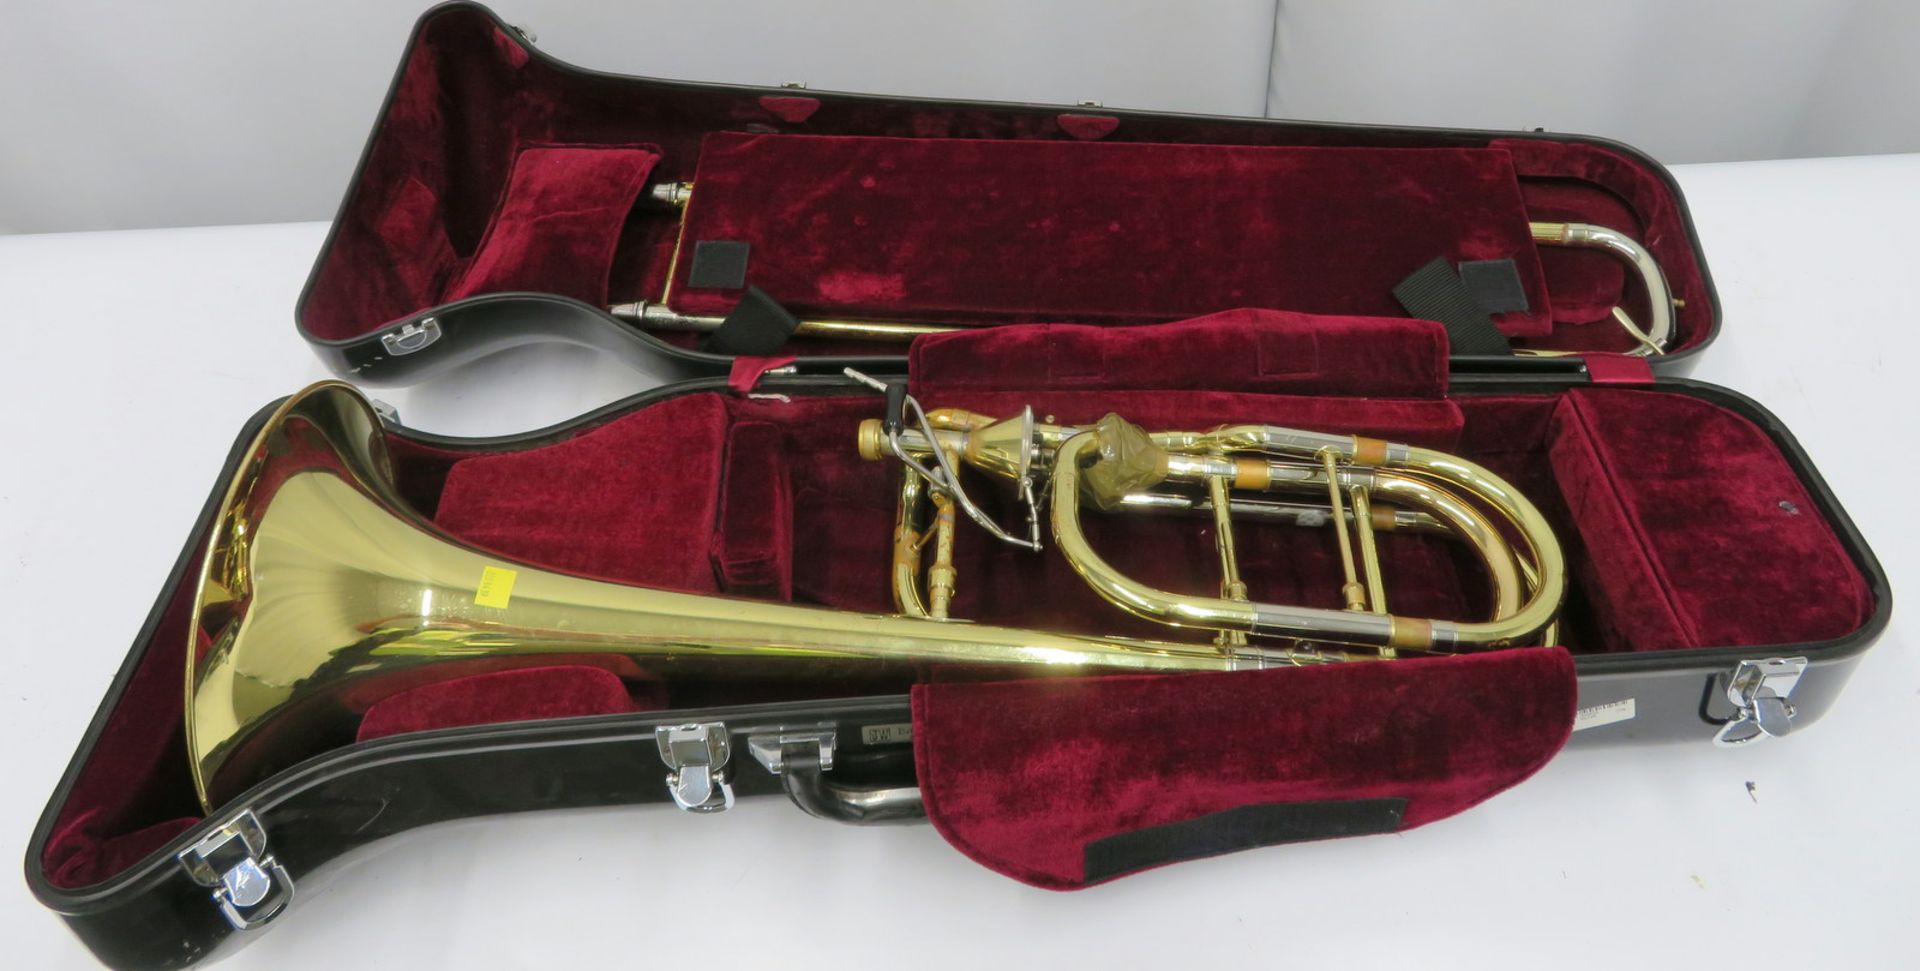 Edwards Instruments 1119CF trombone with case. Serial number: 0907037.